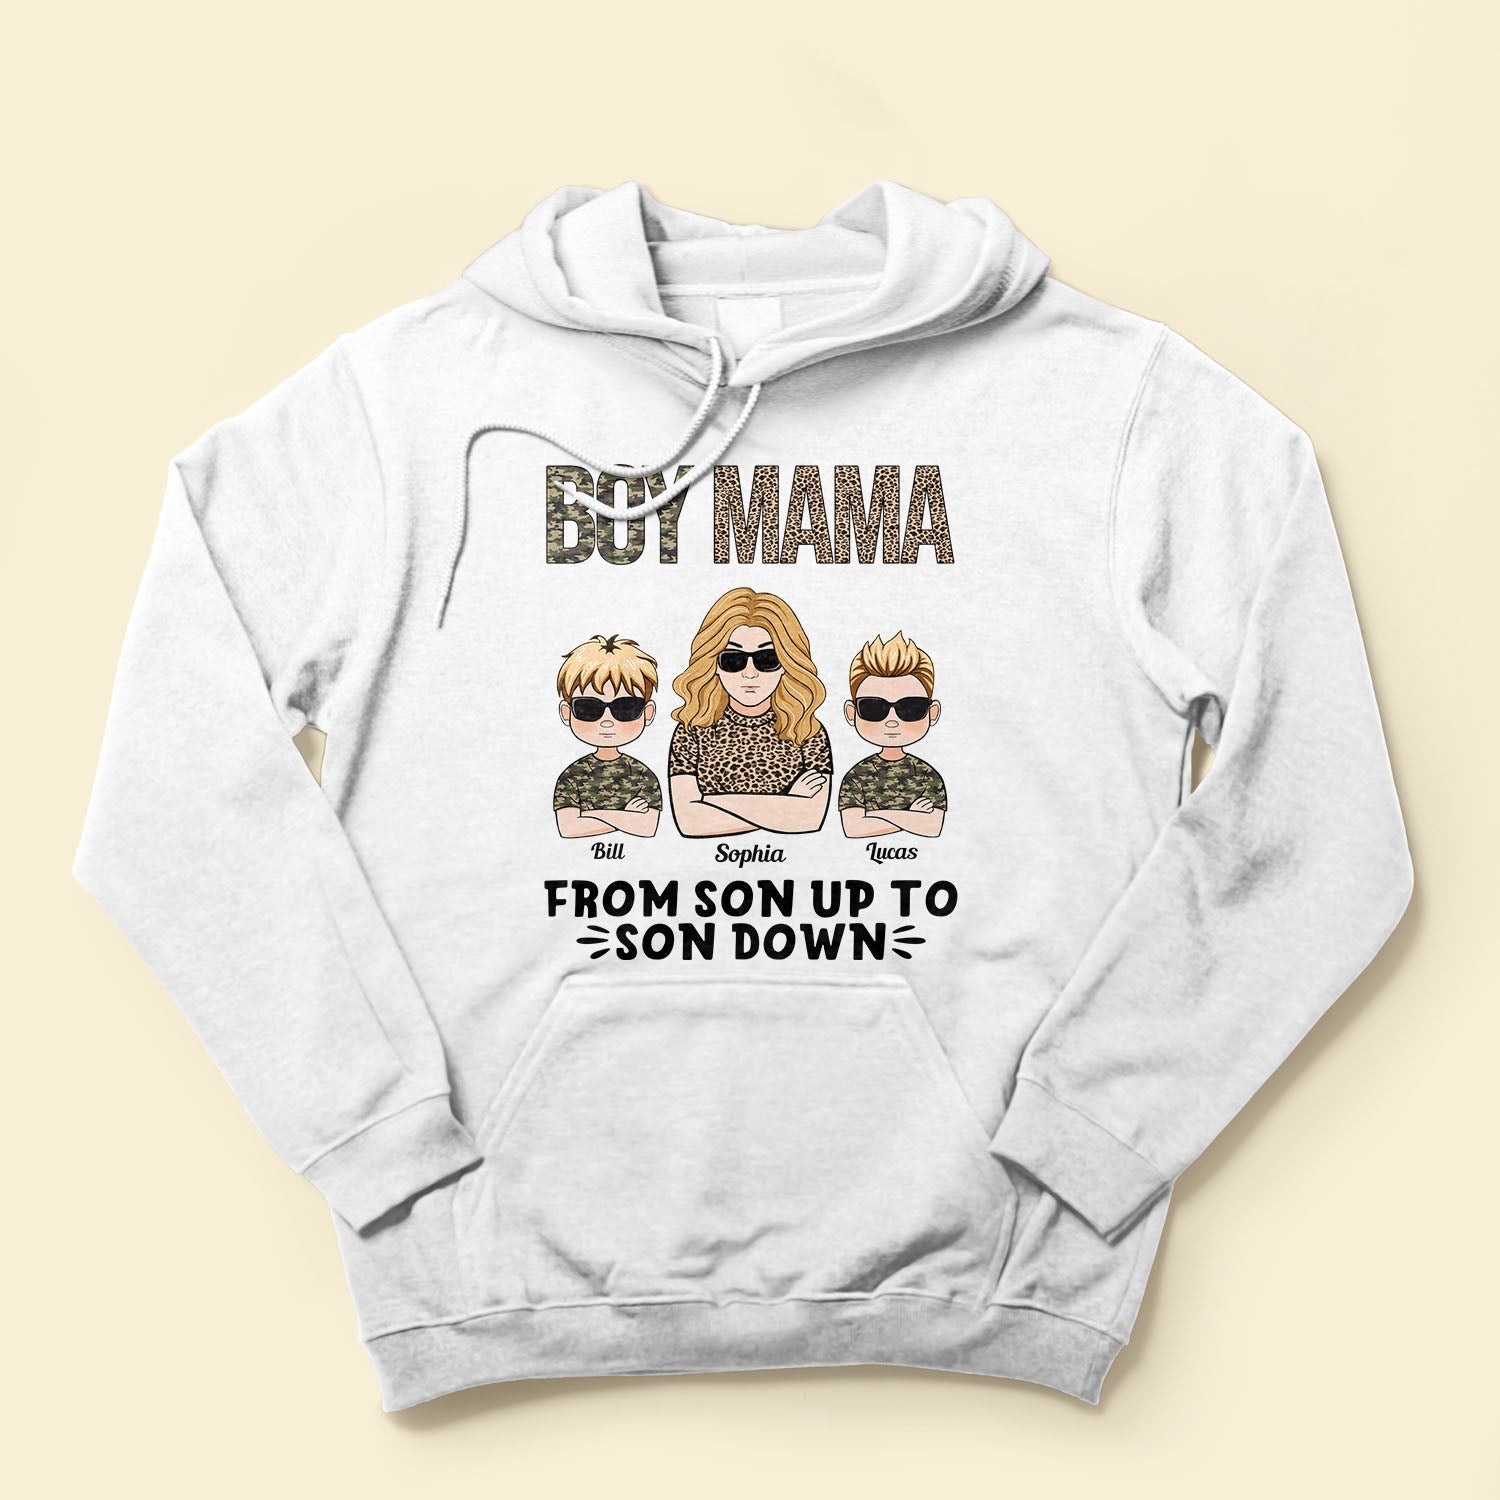 Boy Mom Sweatshirt Funny Shirt Mothers Day Gifts For Hoodie Unisex -  AnniversaryTrending